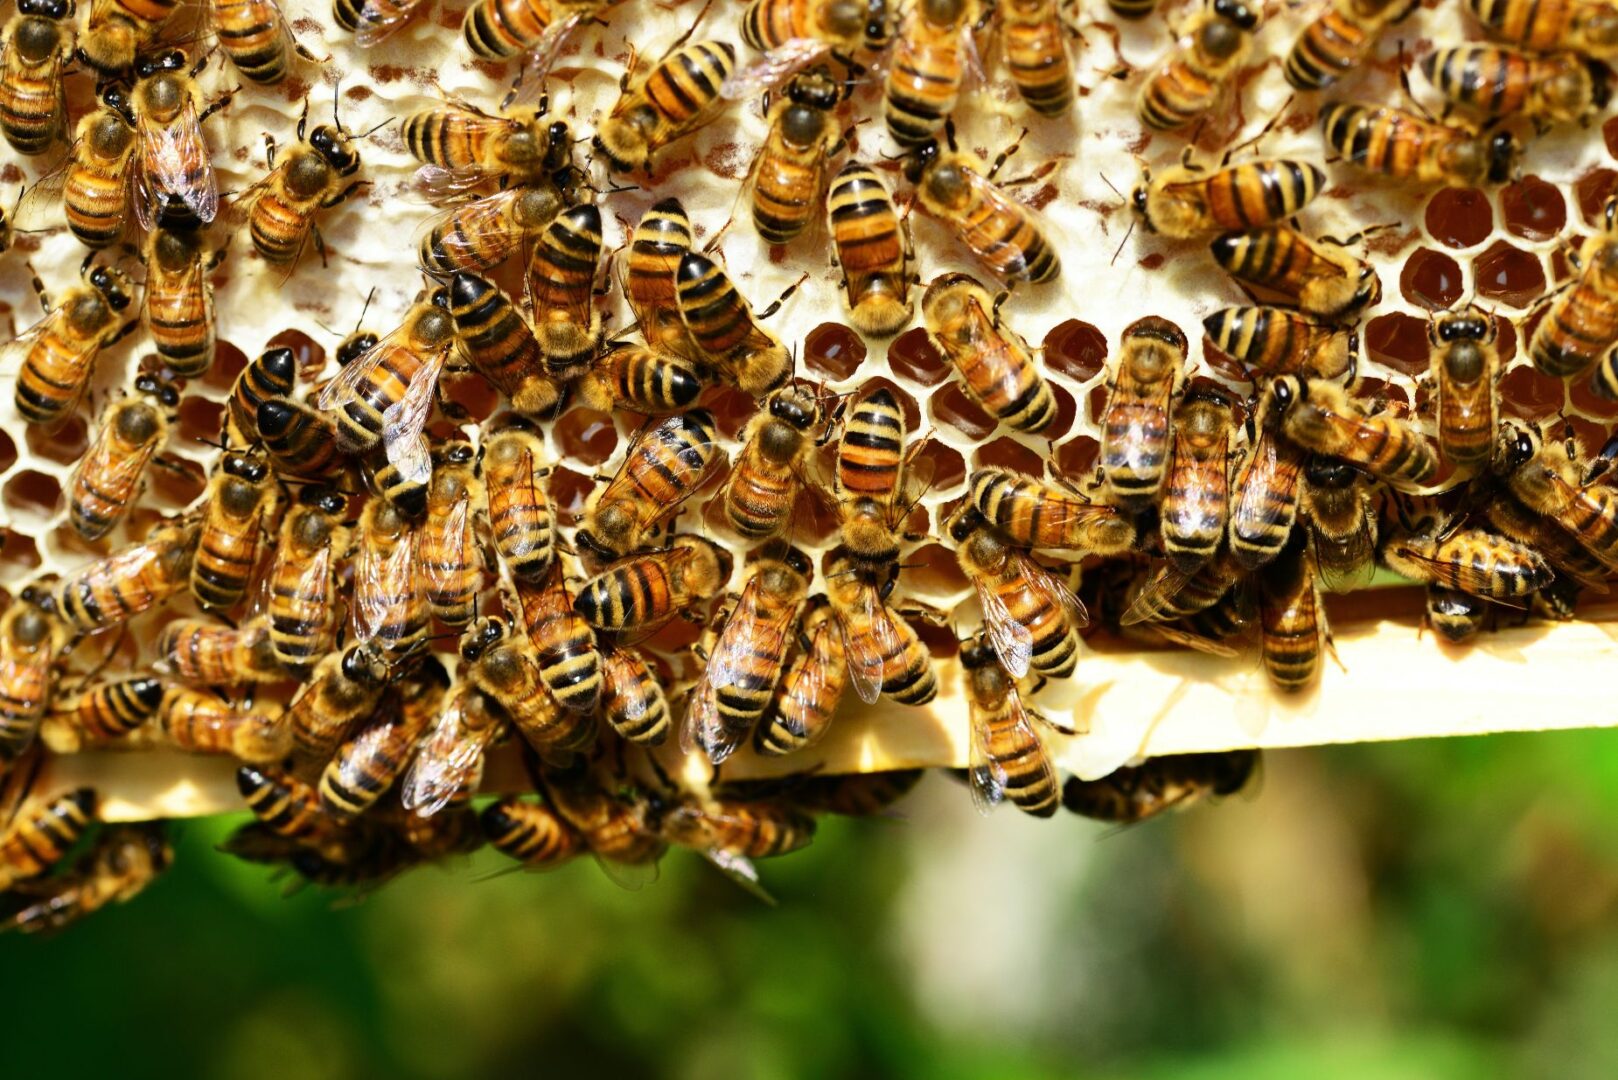 A close up of bees on a honeycomb